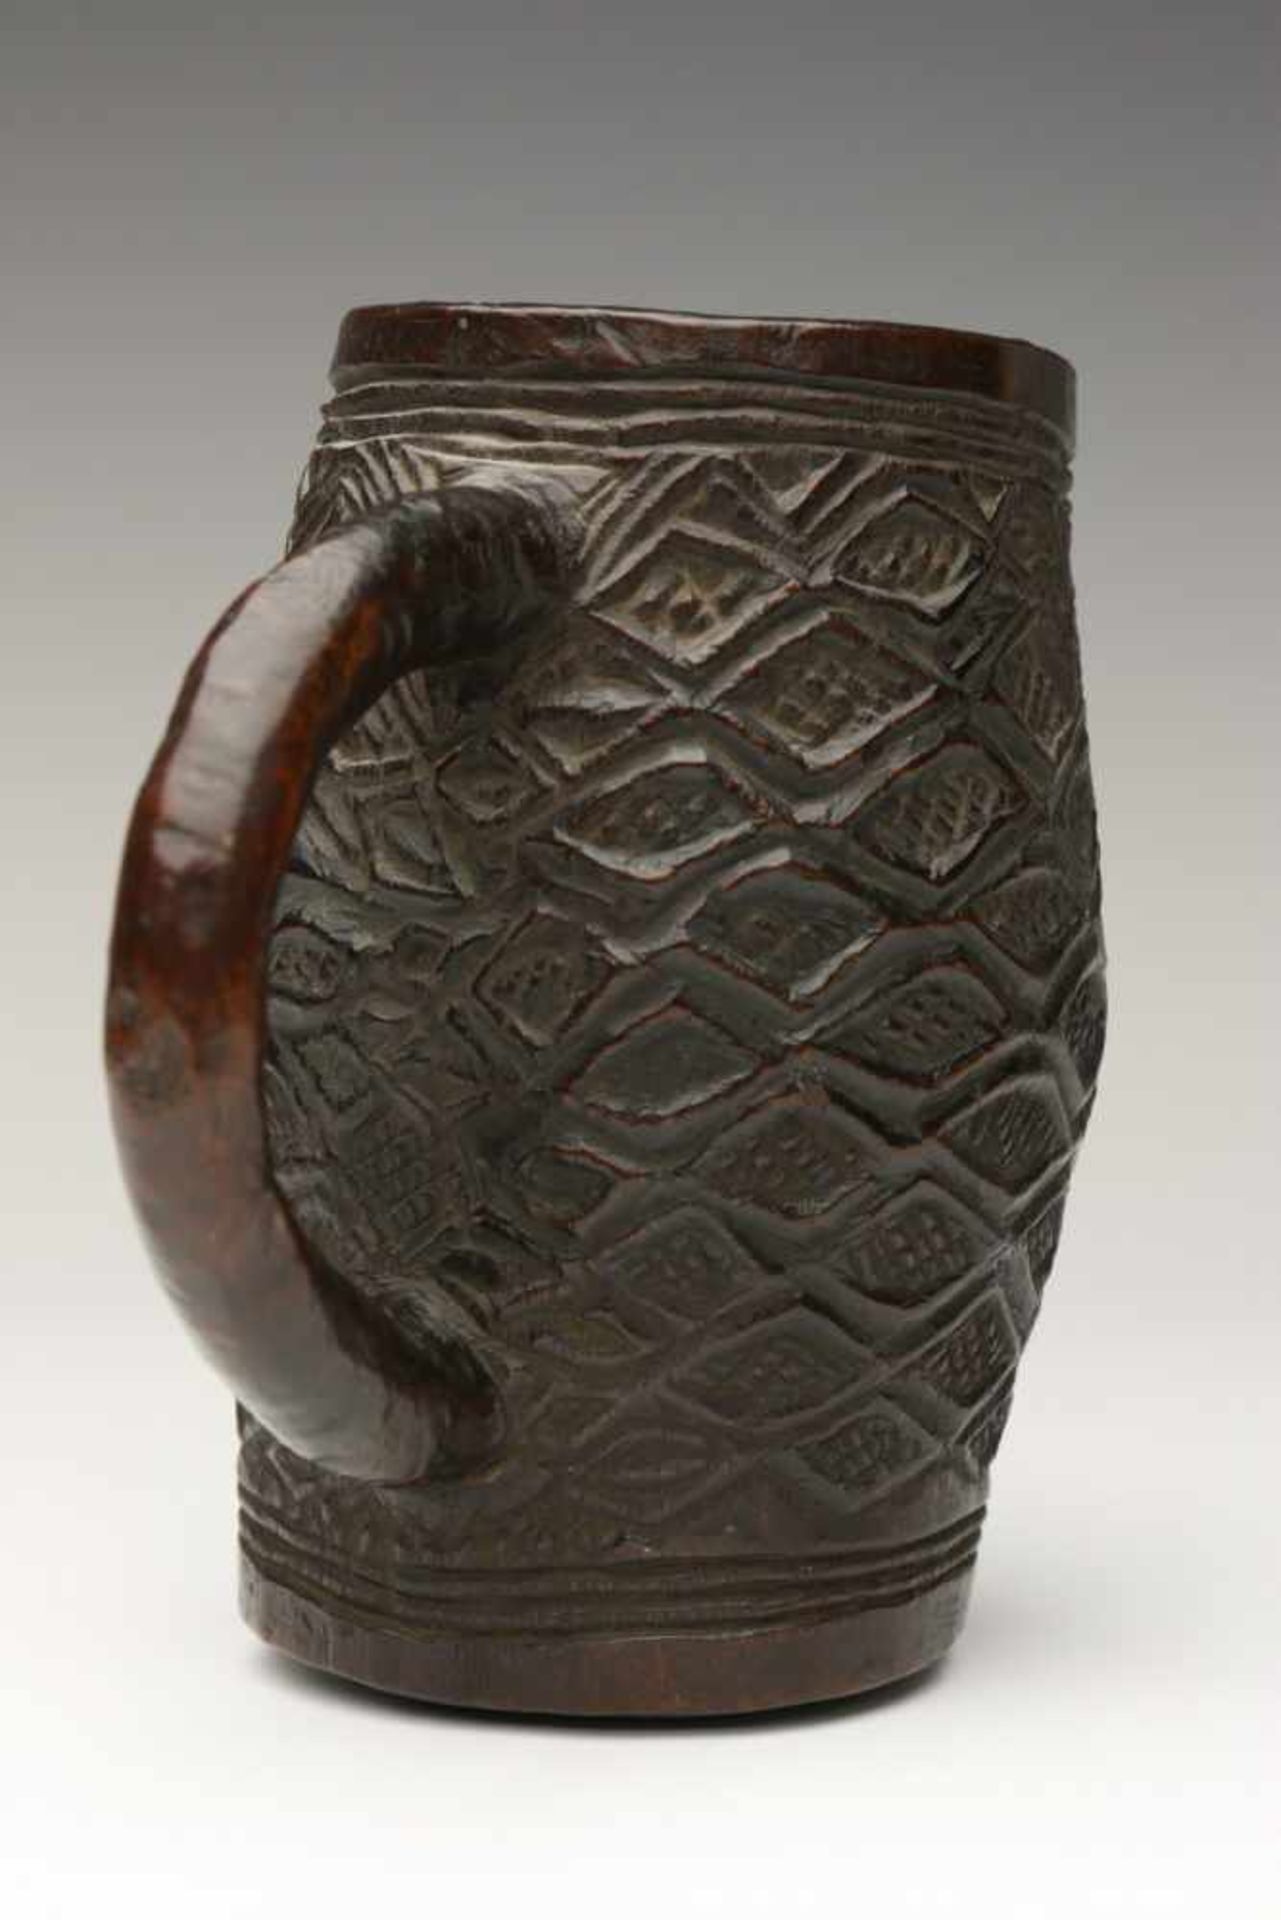 DRC., Kuba Kingdom, old carved wooden palm wine cup,with carved geometrical patterns and black brown